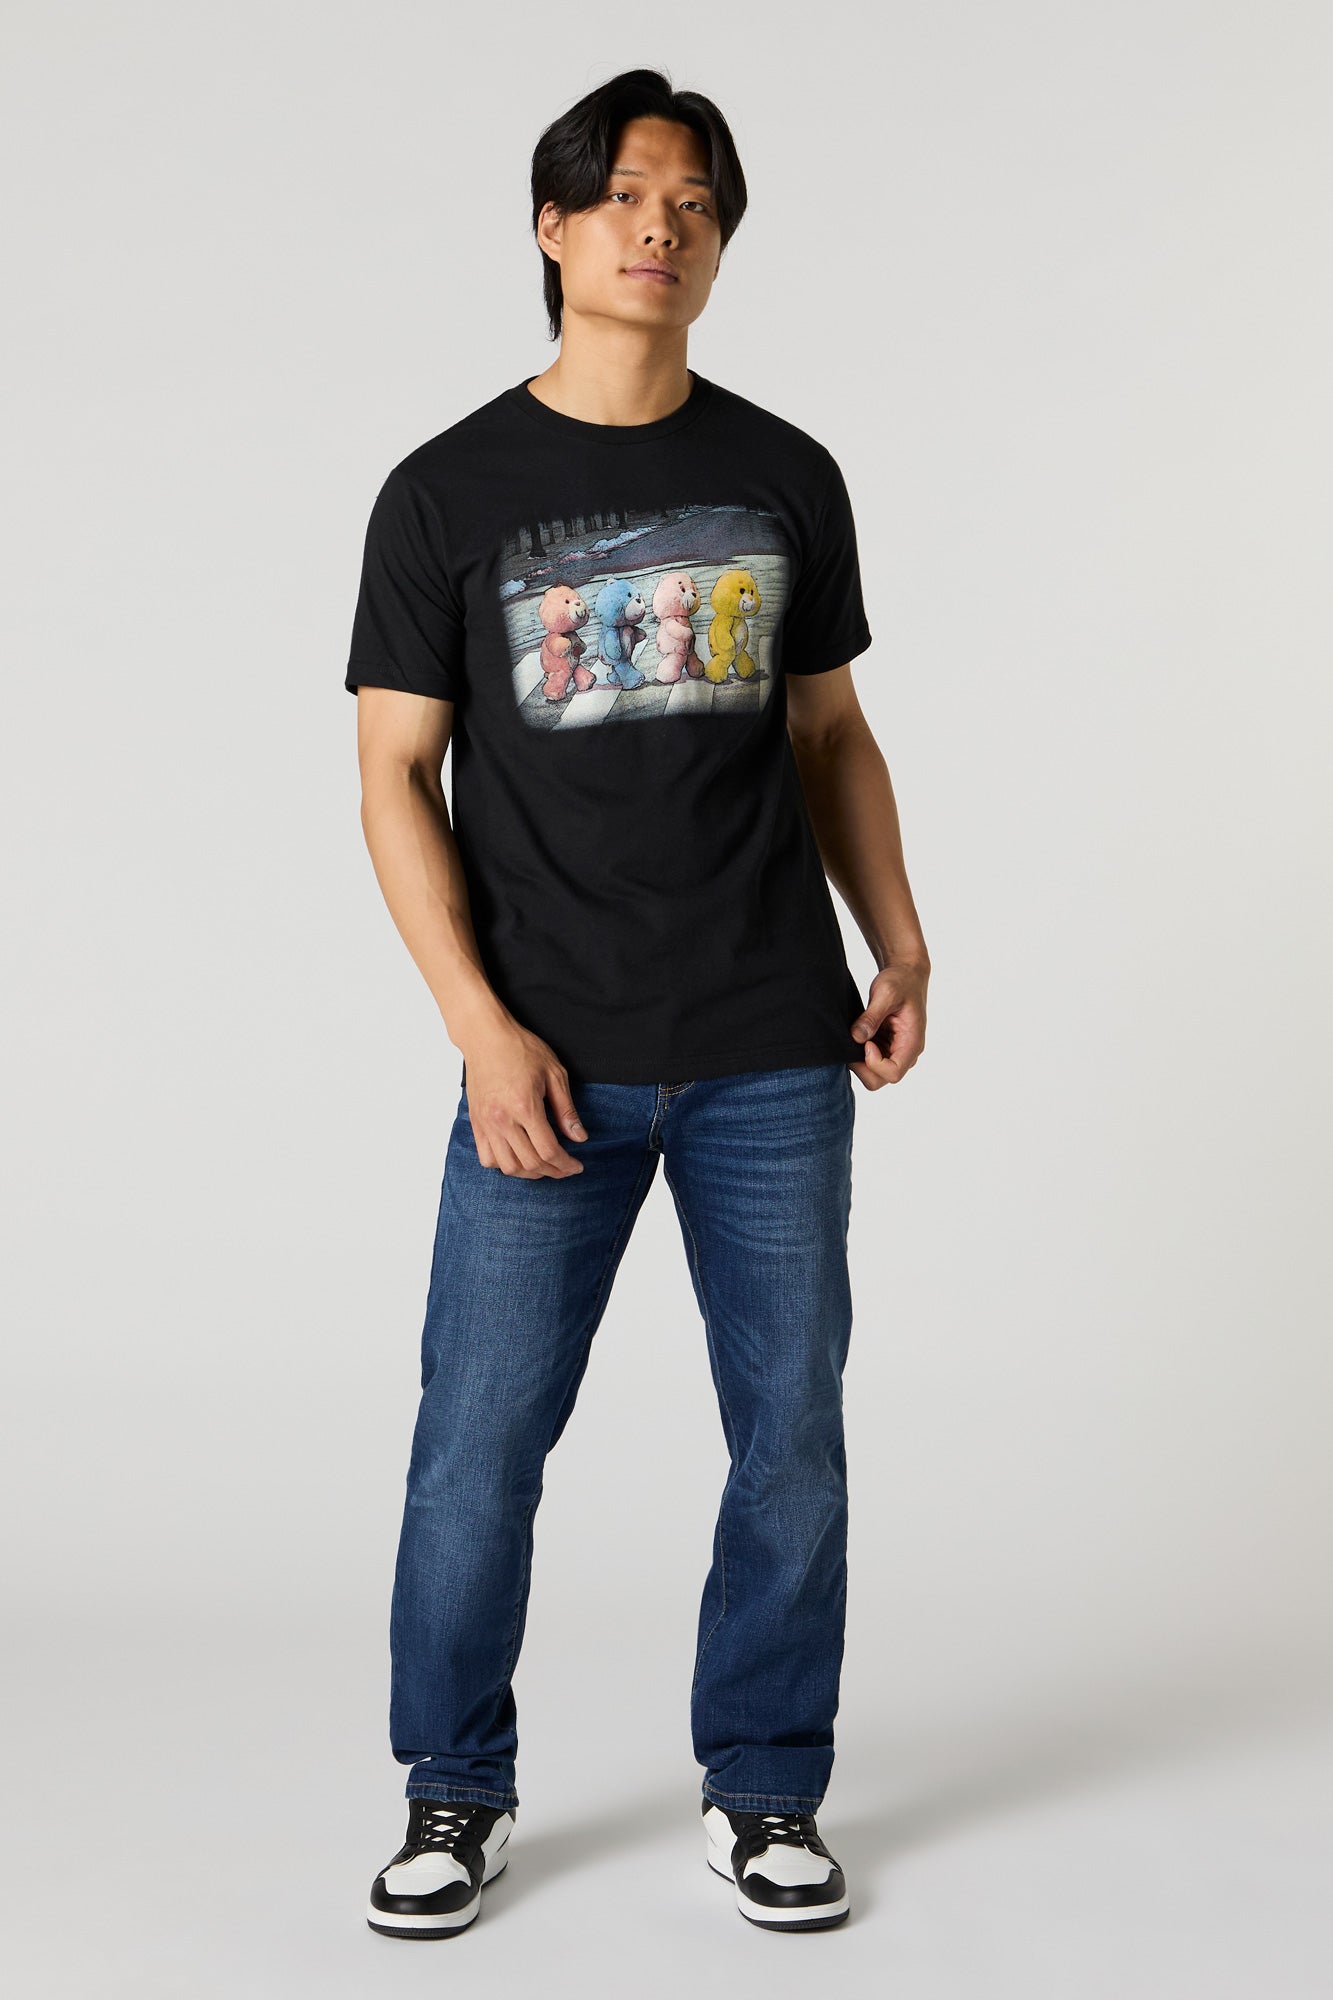 Care Bears Abbey Road Graphic T-Shirt